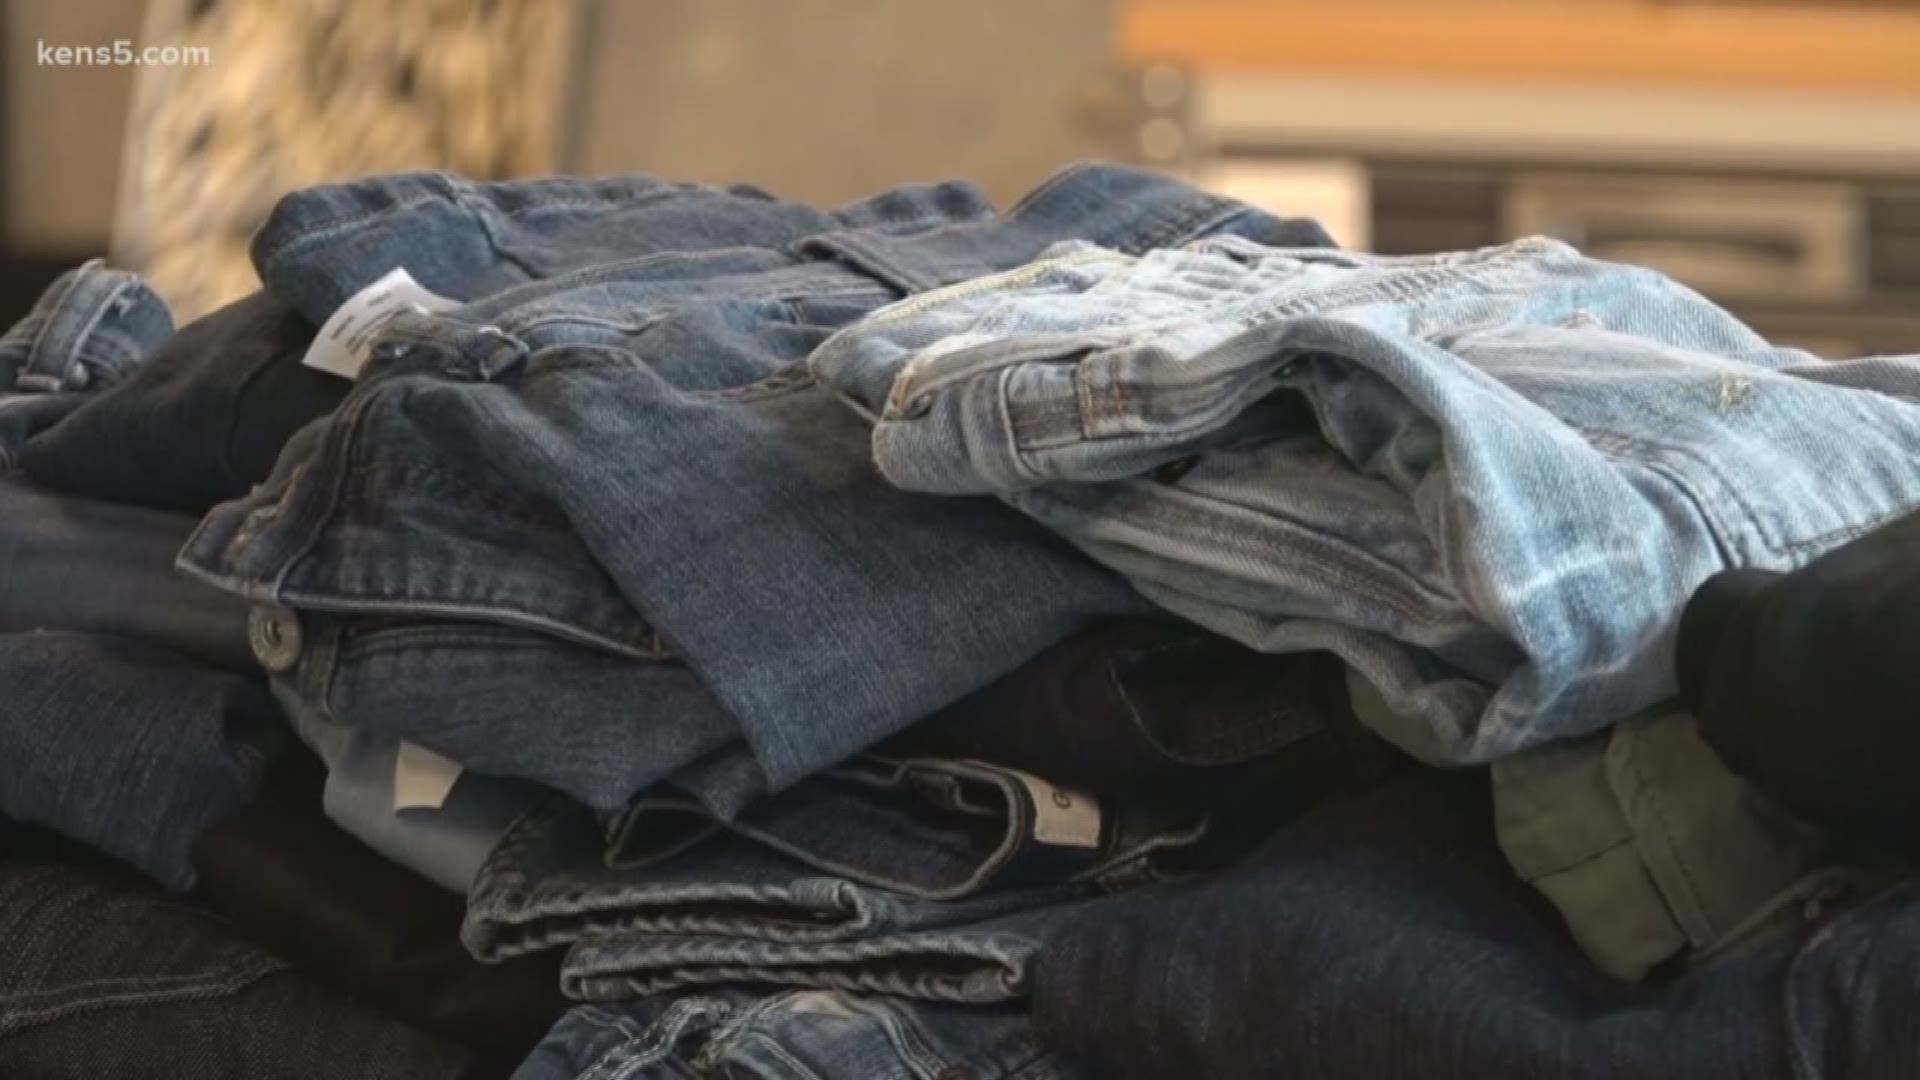 Most consider them a wardrobe basic, but not everyone has the luxury of owning jeans. Eyewitness News reporter Sharon Ko explains how Joint Base San Antonio Randolph has adopted the mission of helping homeless teens get a pair for a decade